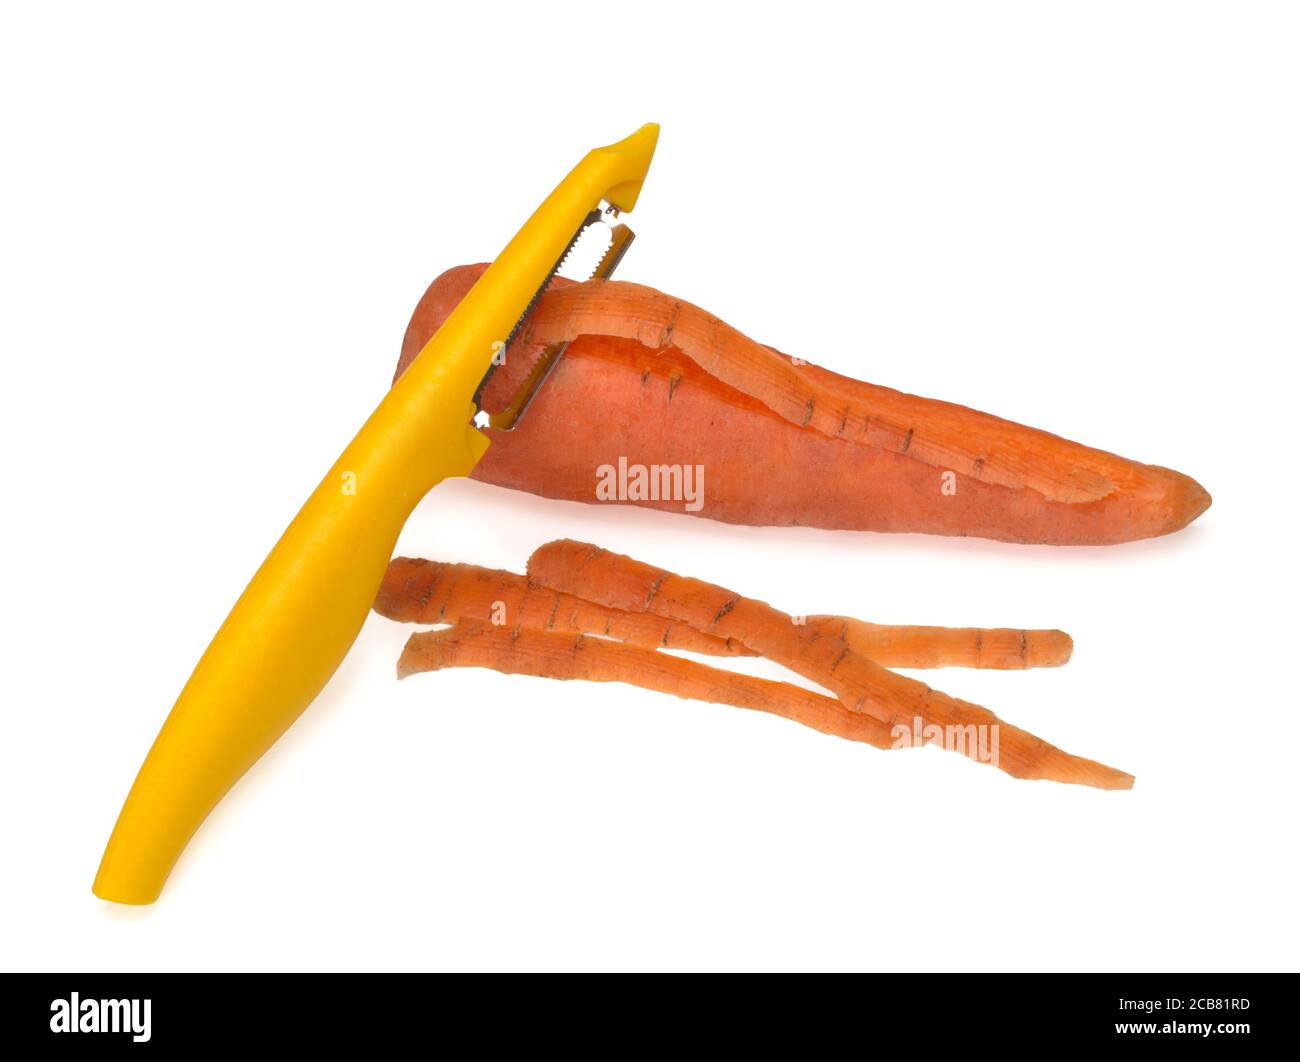 Yellow peeler, used to peel a carrot on white background. Knife, peeler for vegetables and fruits Stock Photo